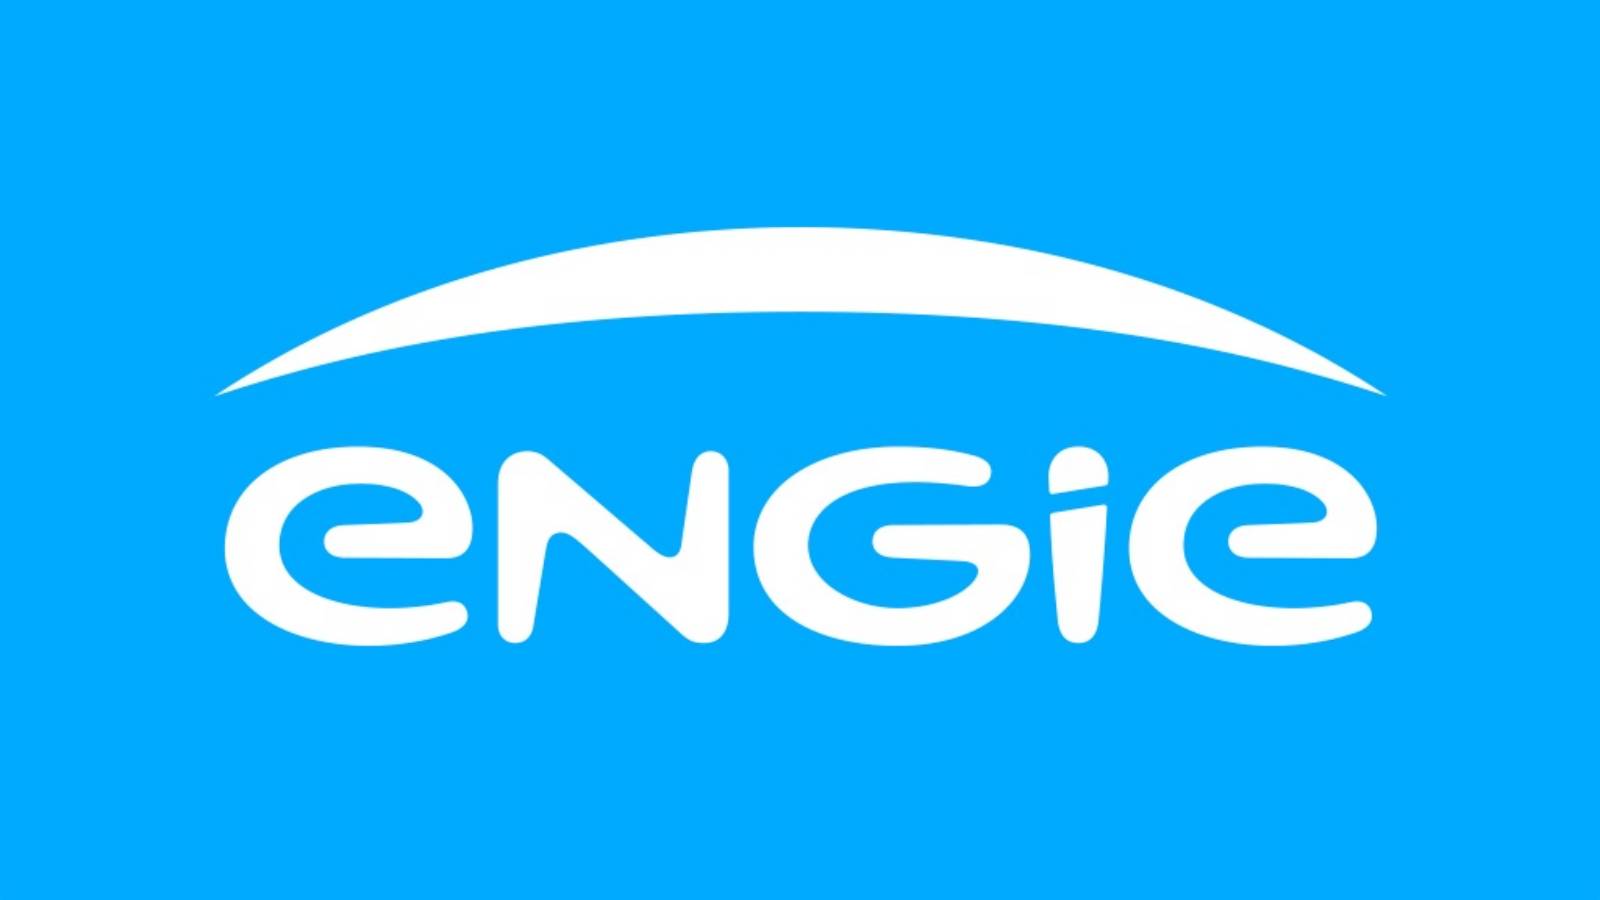 IMPORTANT LAST MINUTE ENGIE Application Romania customers